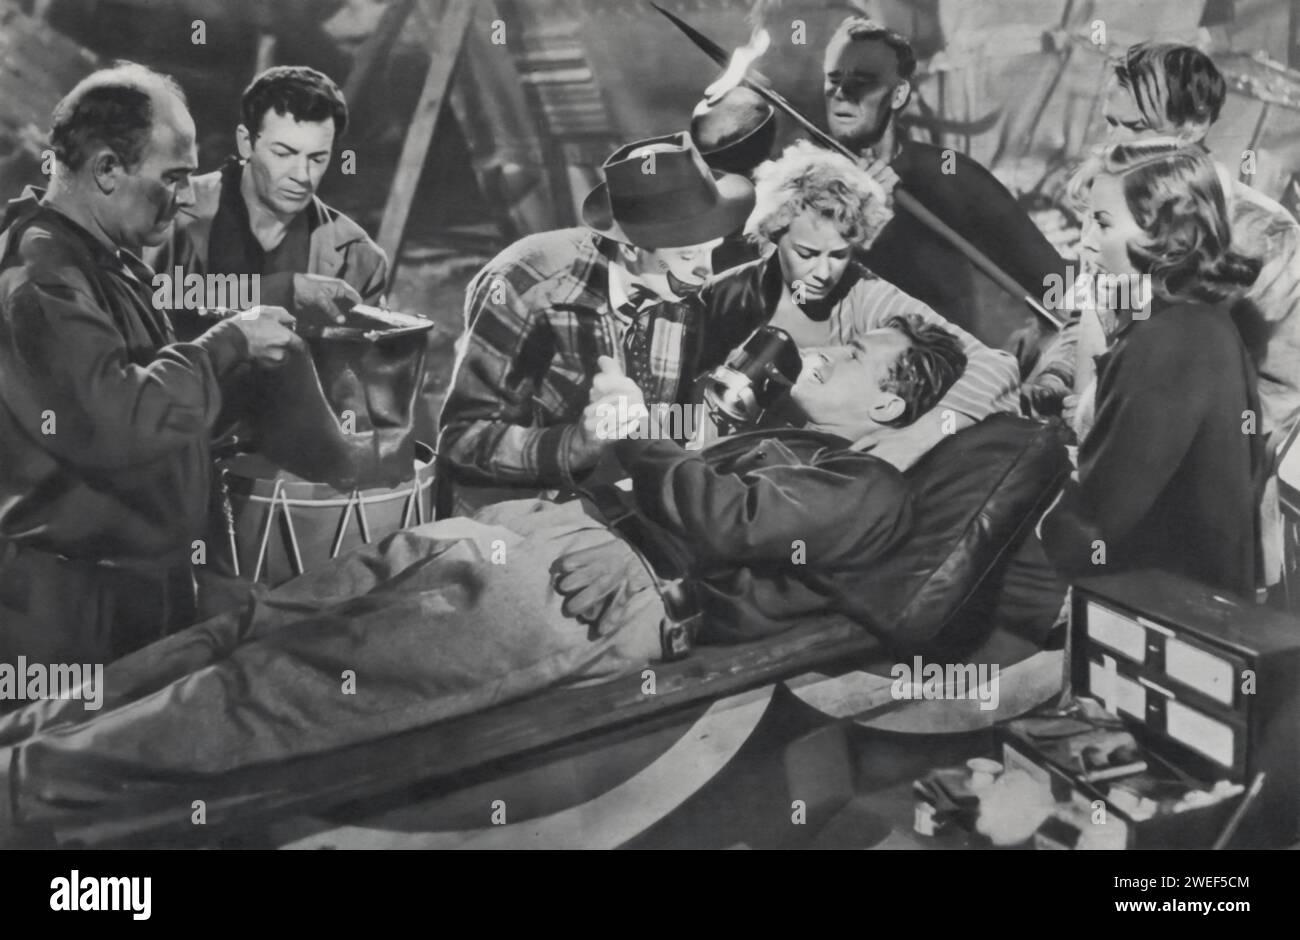 Cornel Wilde, James Stewart, Betty Hutton, Charlton Heston, and Gloria Grahame star in 'The Greatest Show on Earth' (1952), a drama film set in the vibrant world of the circus. Heston plays Brad Braden, the circus manager, Hutton portrays Holly, a trapeze artist, Wilde is The Great Sebastian, her high-flying rival and love interest, Stewart appears as Buttons, a mysterious clown with a hidden past, and Grahame plays Angel, another key performer in the troupe. Stock Photo